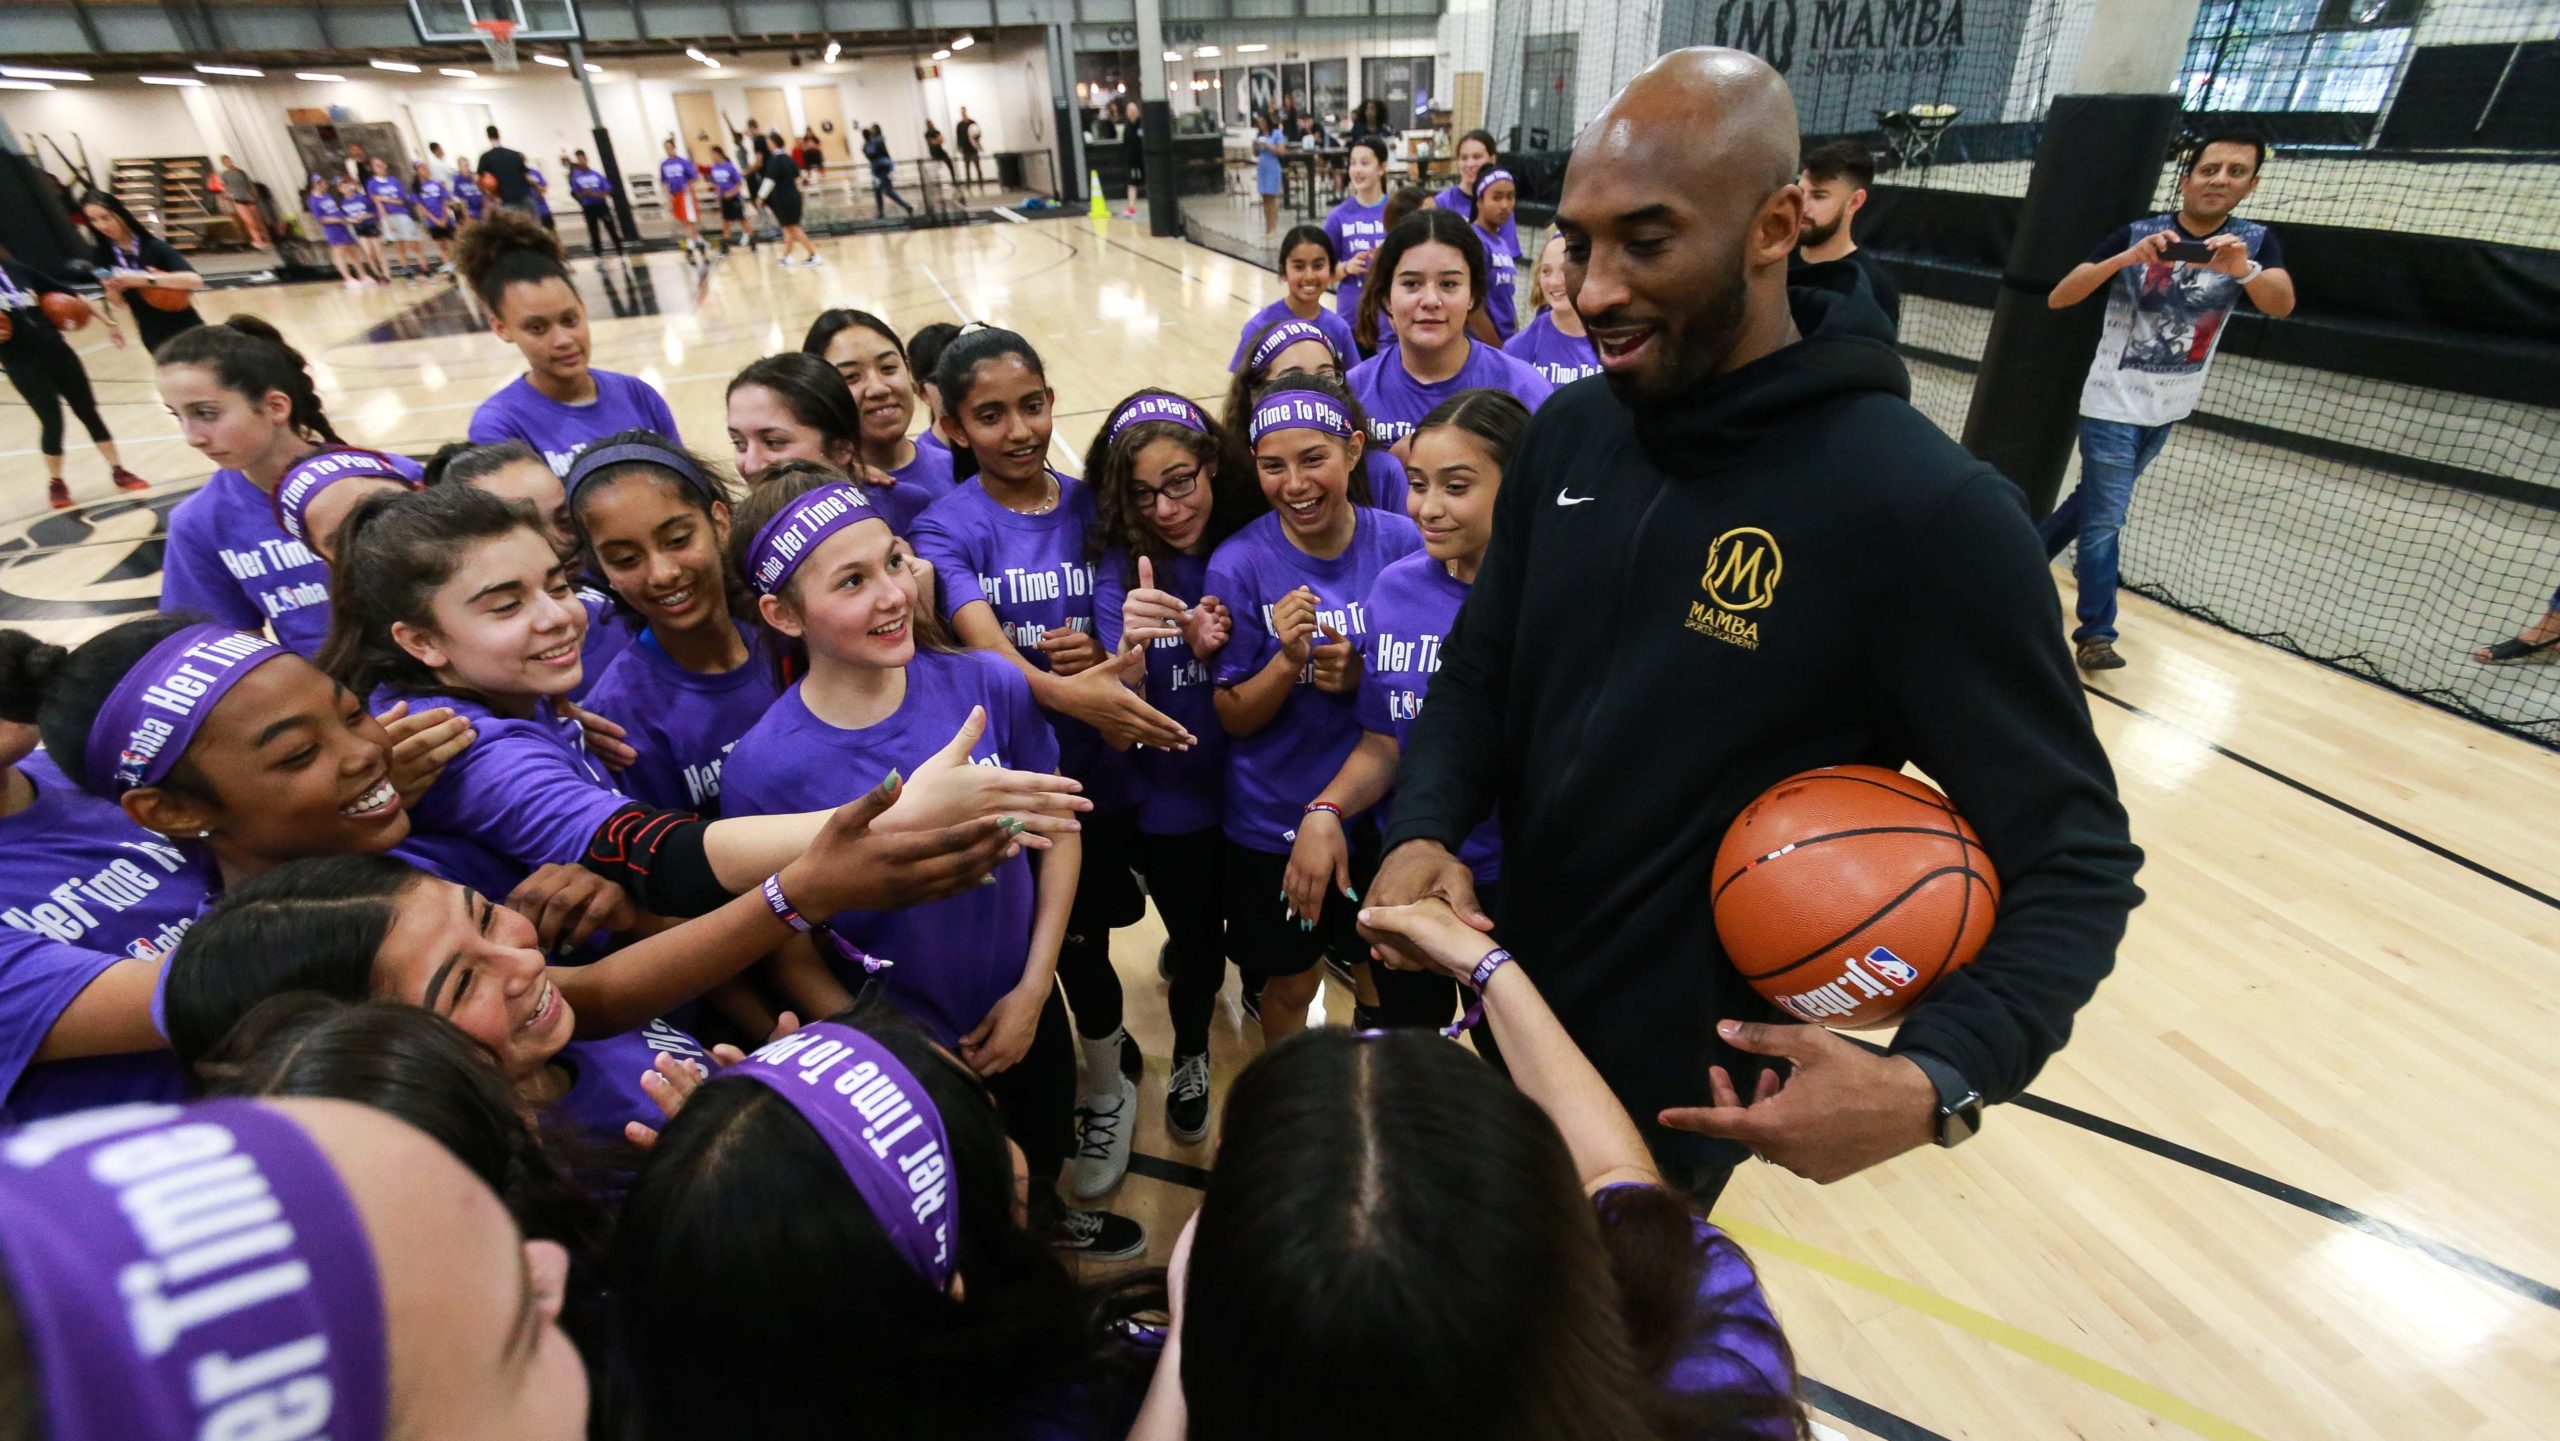 10 Kobe Bryant Facts for Sports Fans 